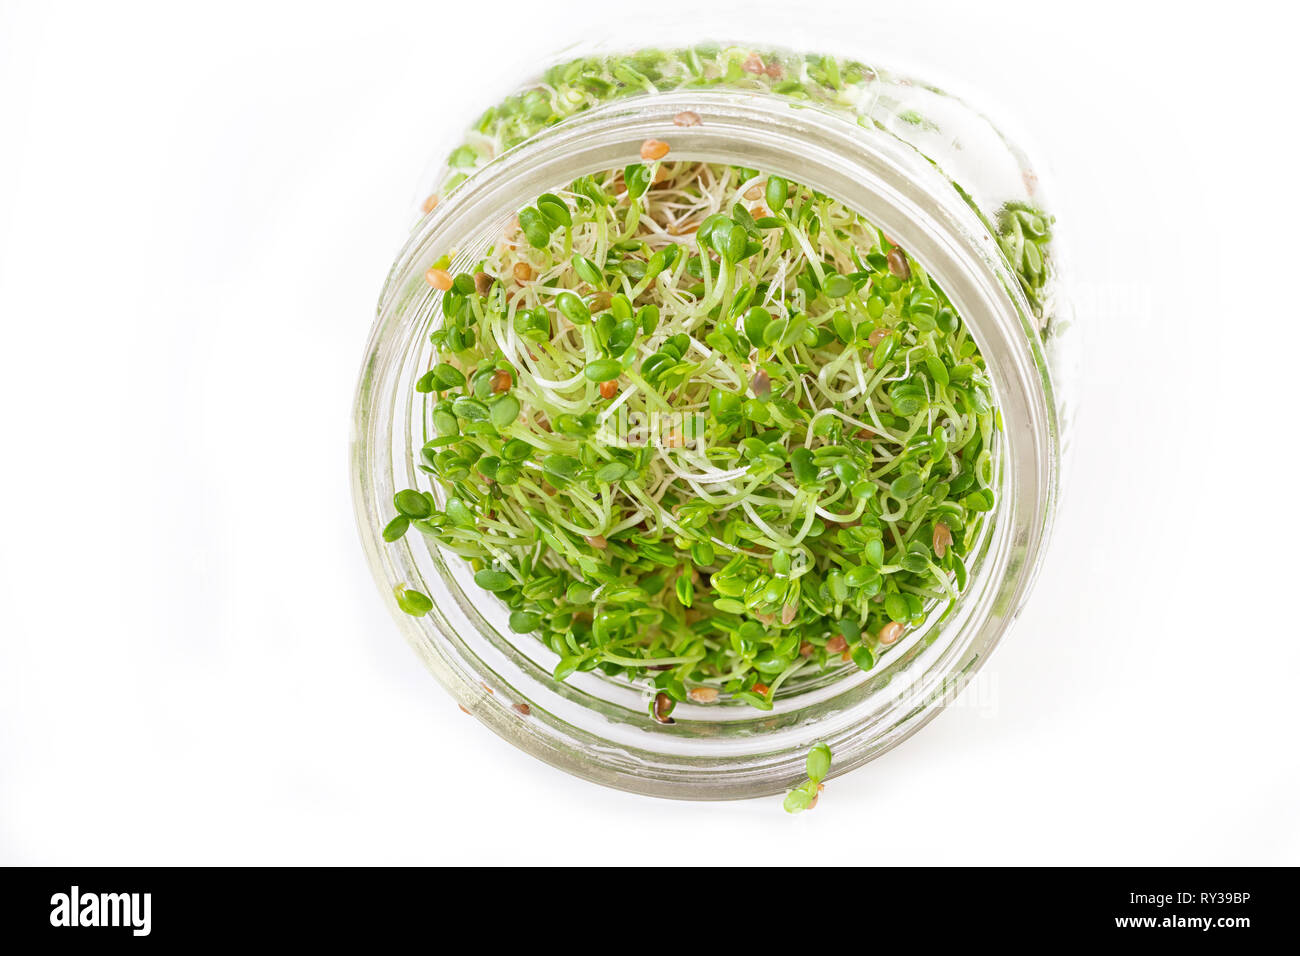 Fresh, raw red clover sprouts. Stock Photo